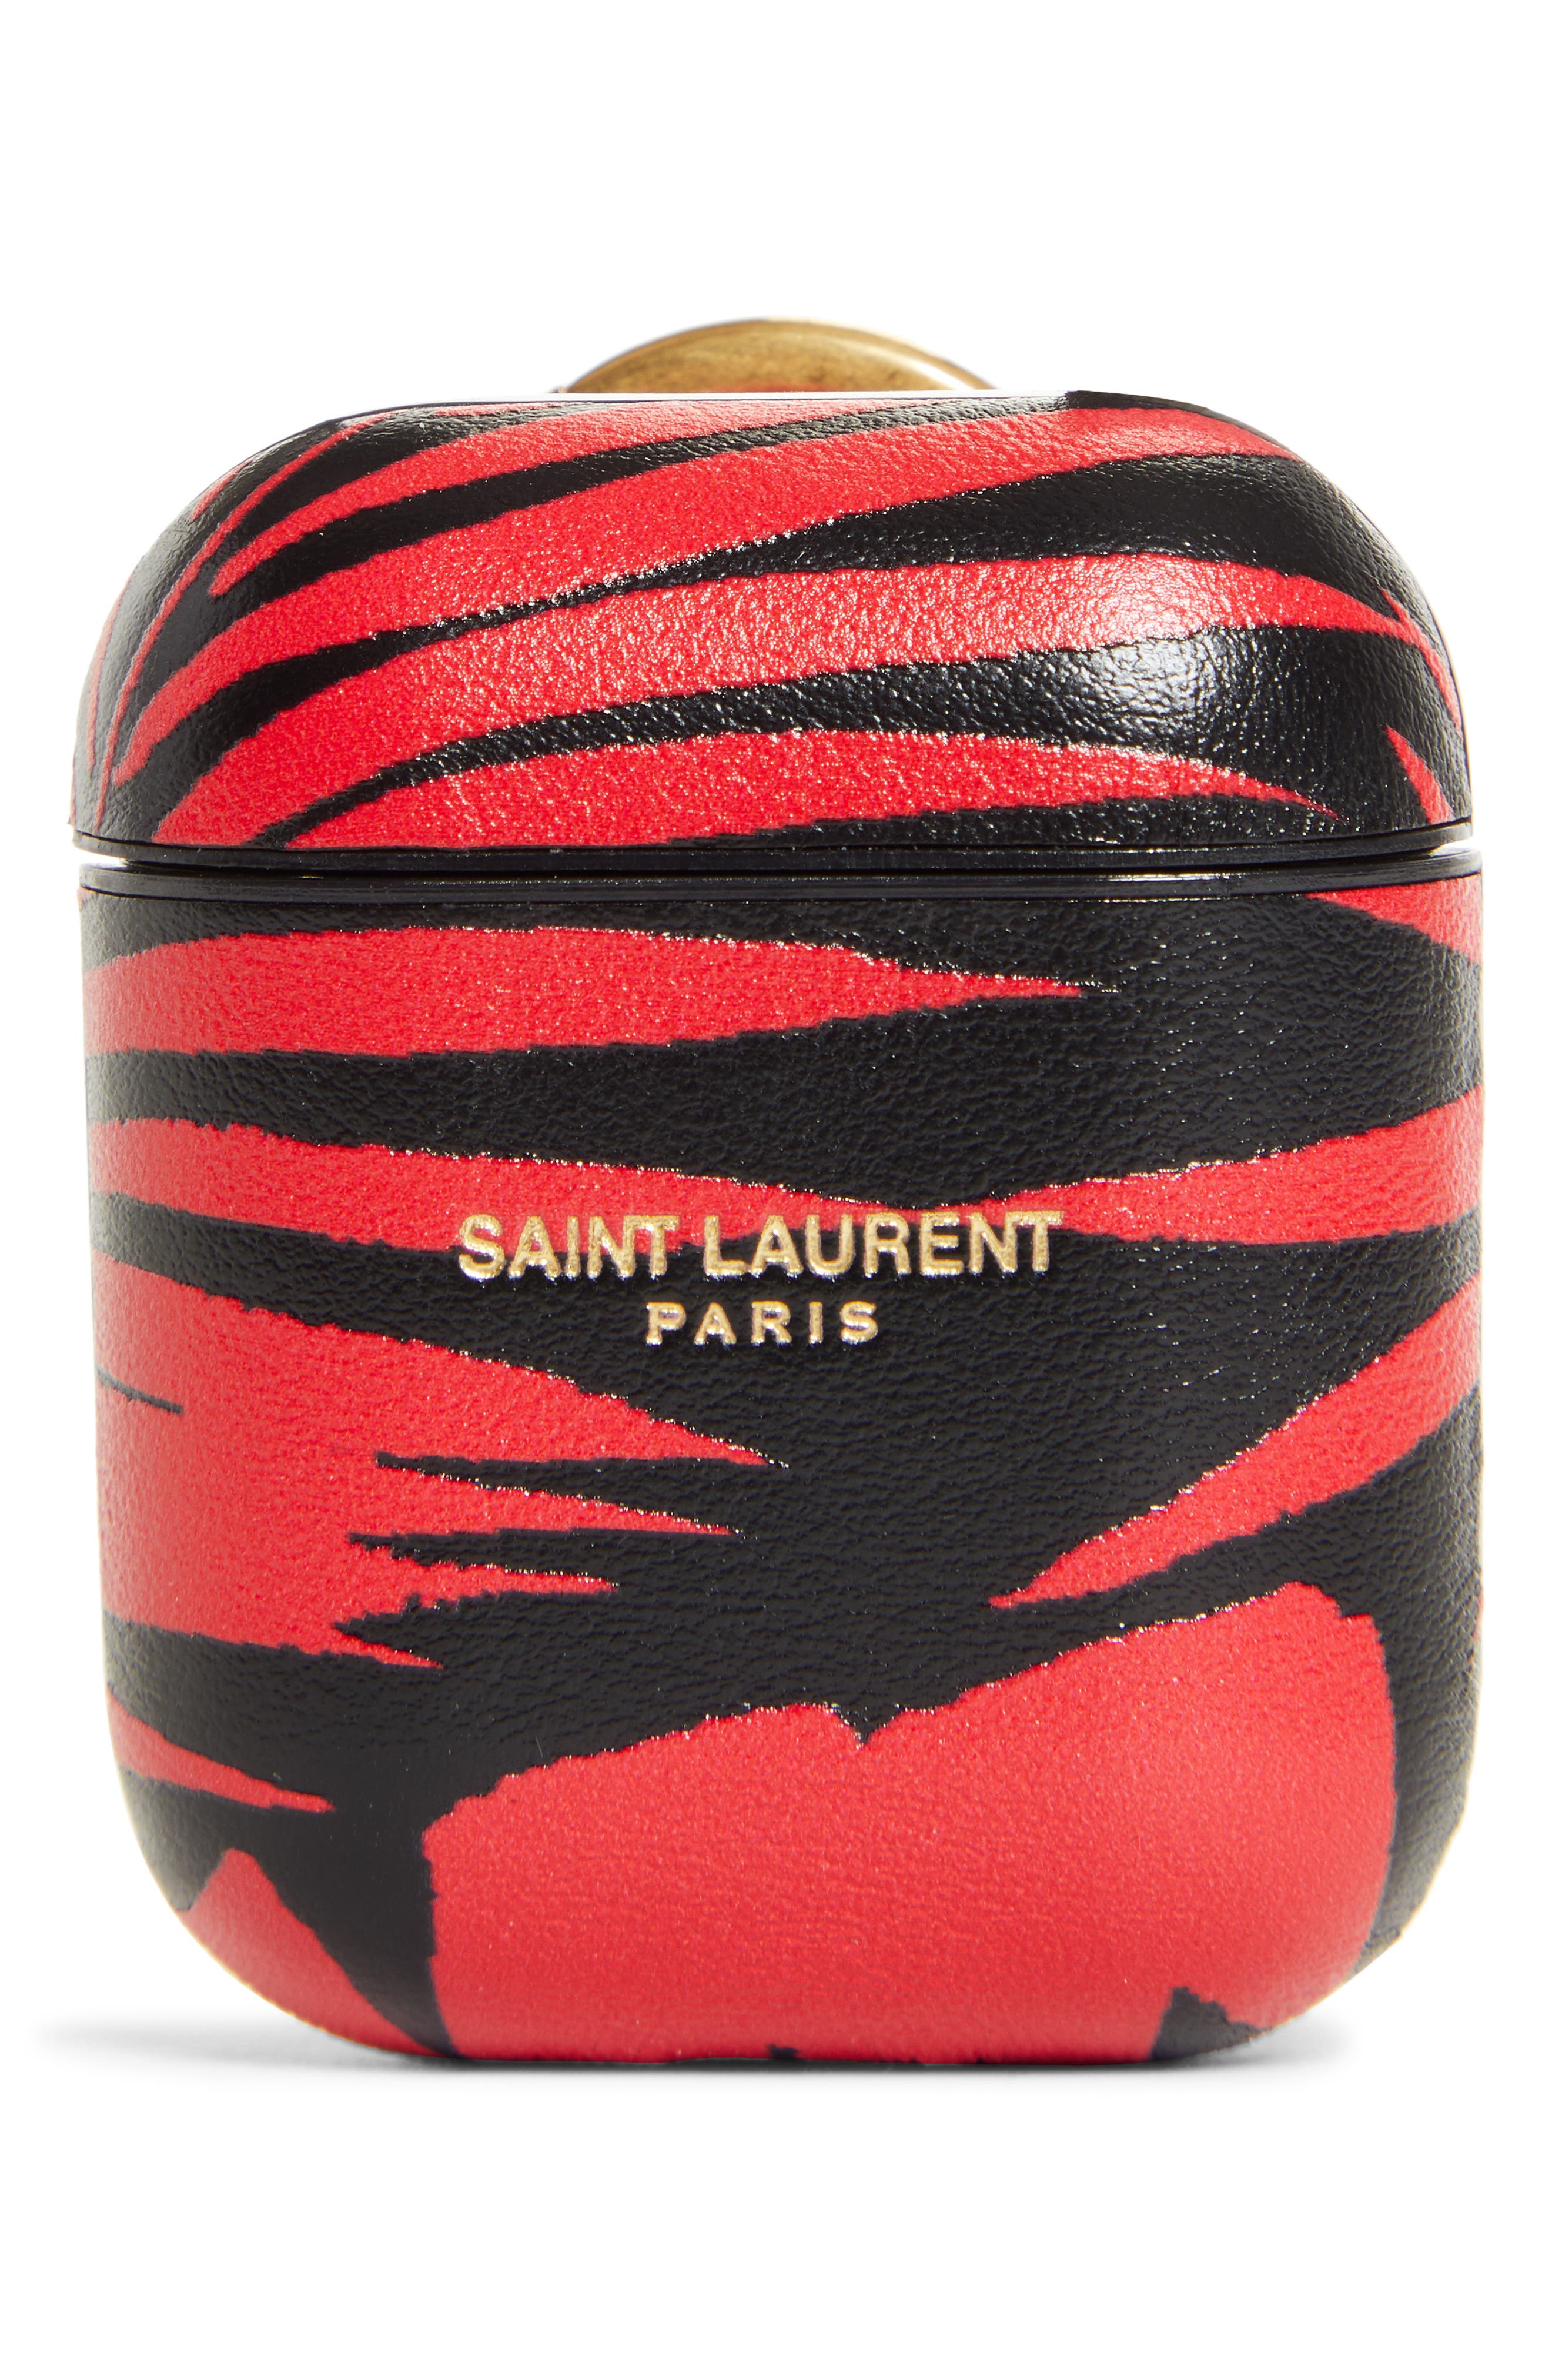 Saint Laurent Tropical Print Leather AirPods Case in Nero/rouge/blk Matt at Nordstrom